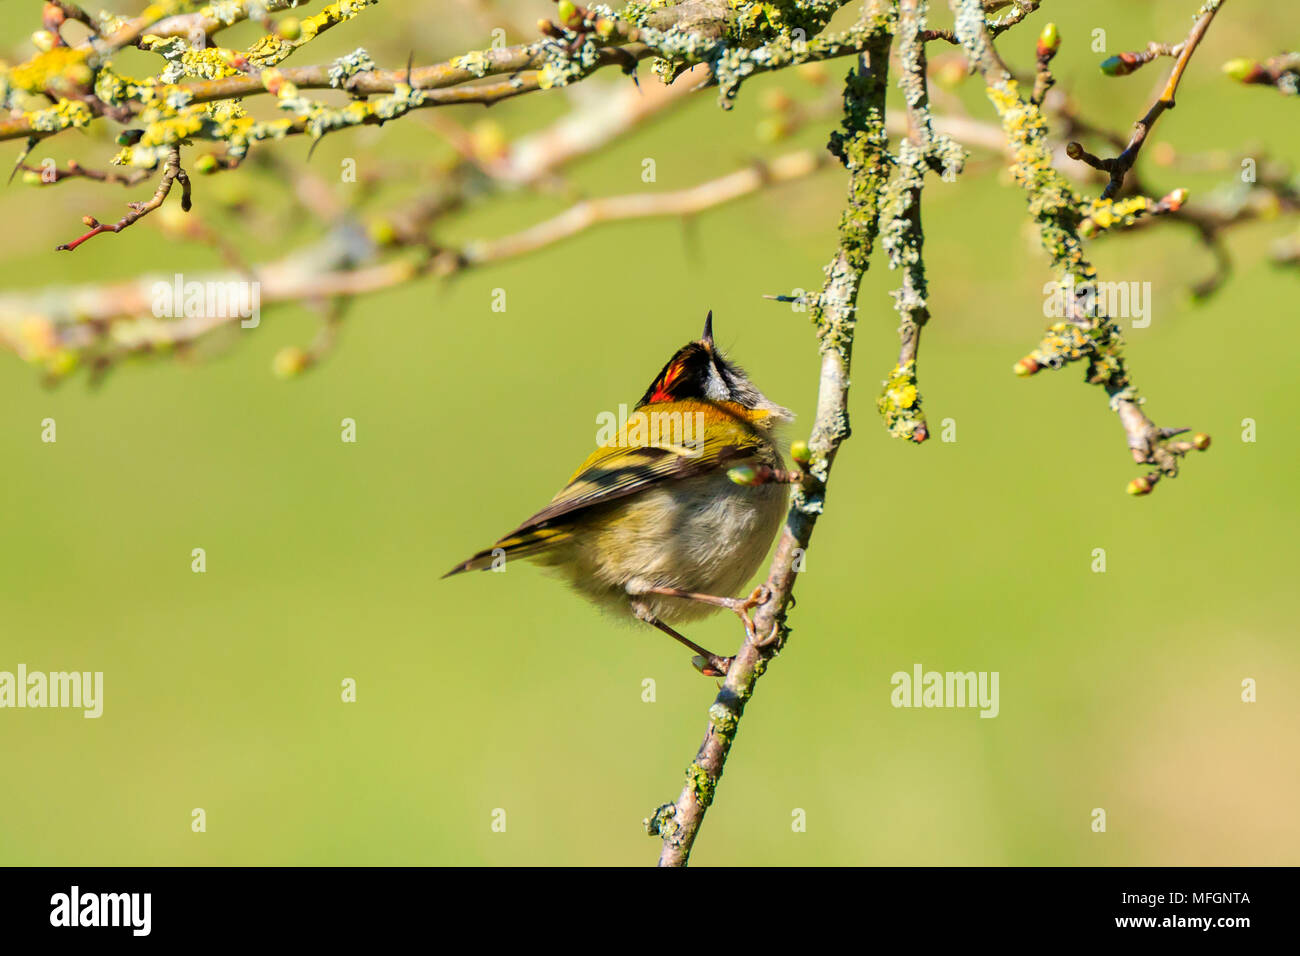 Closeup of a small common firecrest (Regulus ignicapilla) bird foraging through branches of trees and bush during Springtime on a sunny day Stock Photo